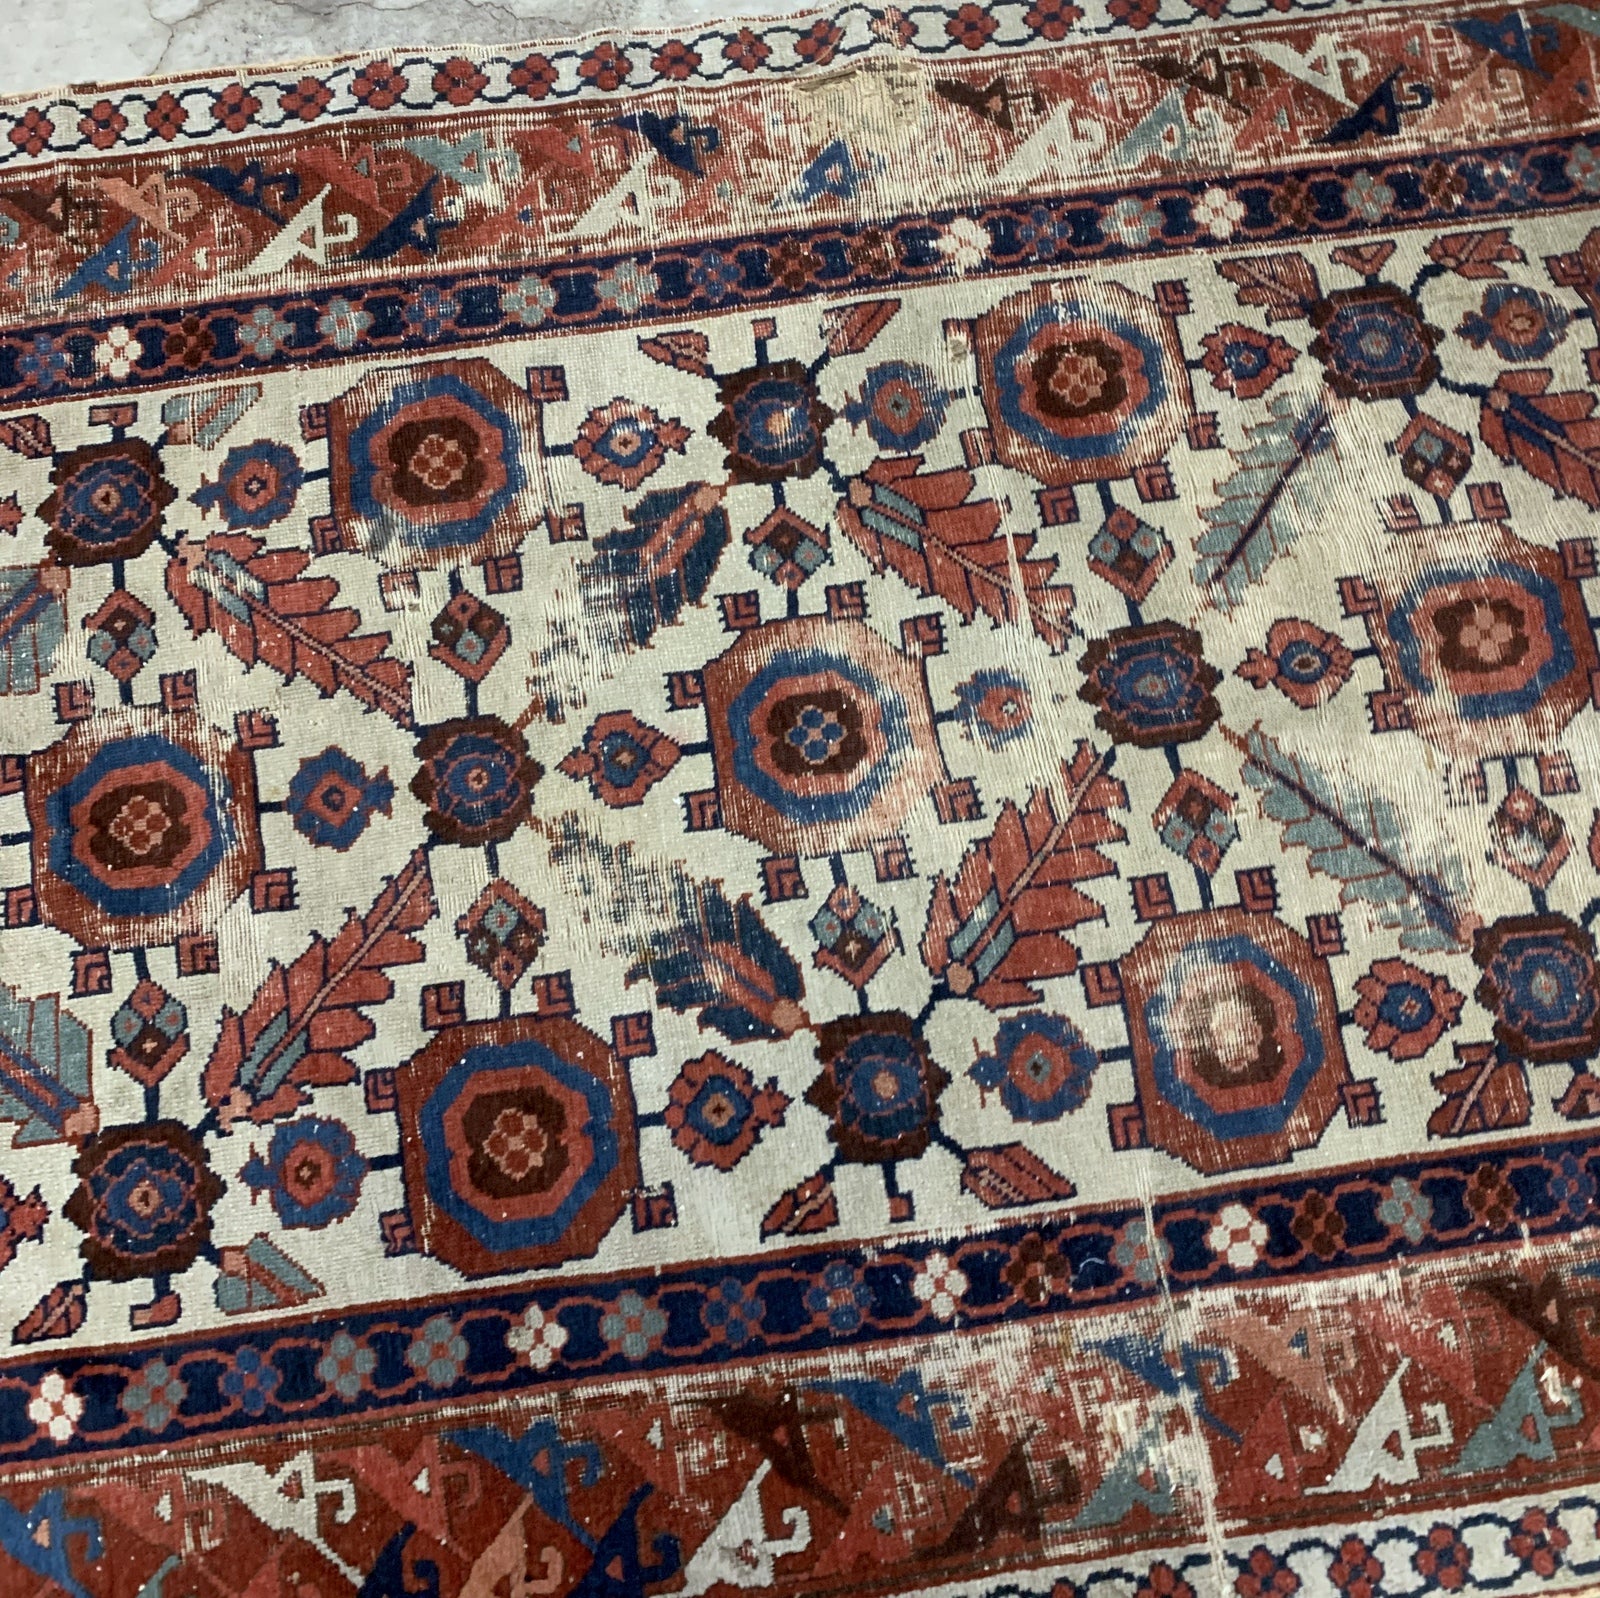 Very old handmade antique North-West Persian rug in white and red background colors. The rug is from the beginning of 19th century in distressed condition.  